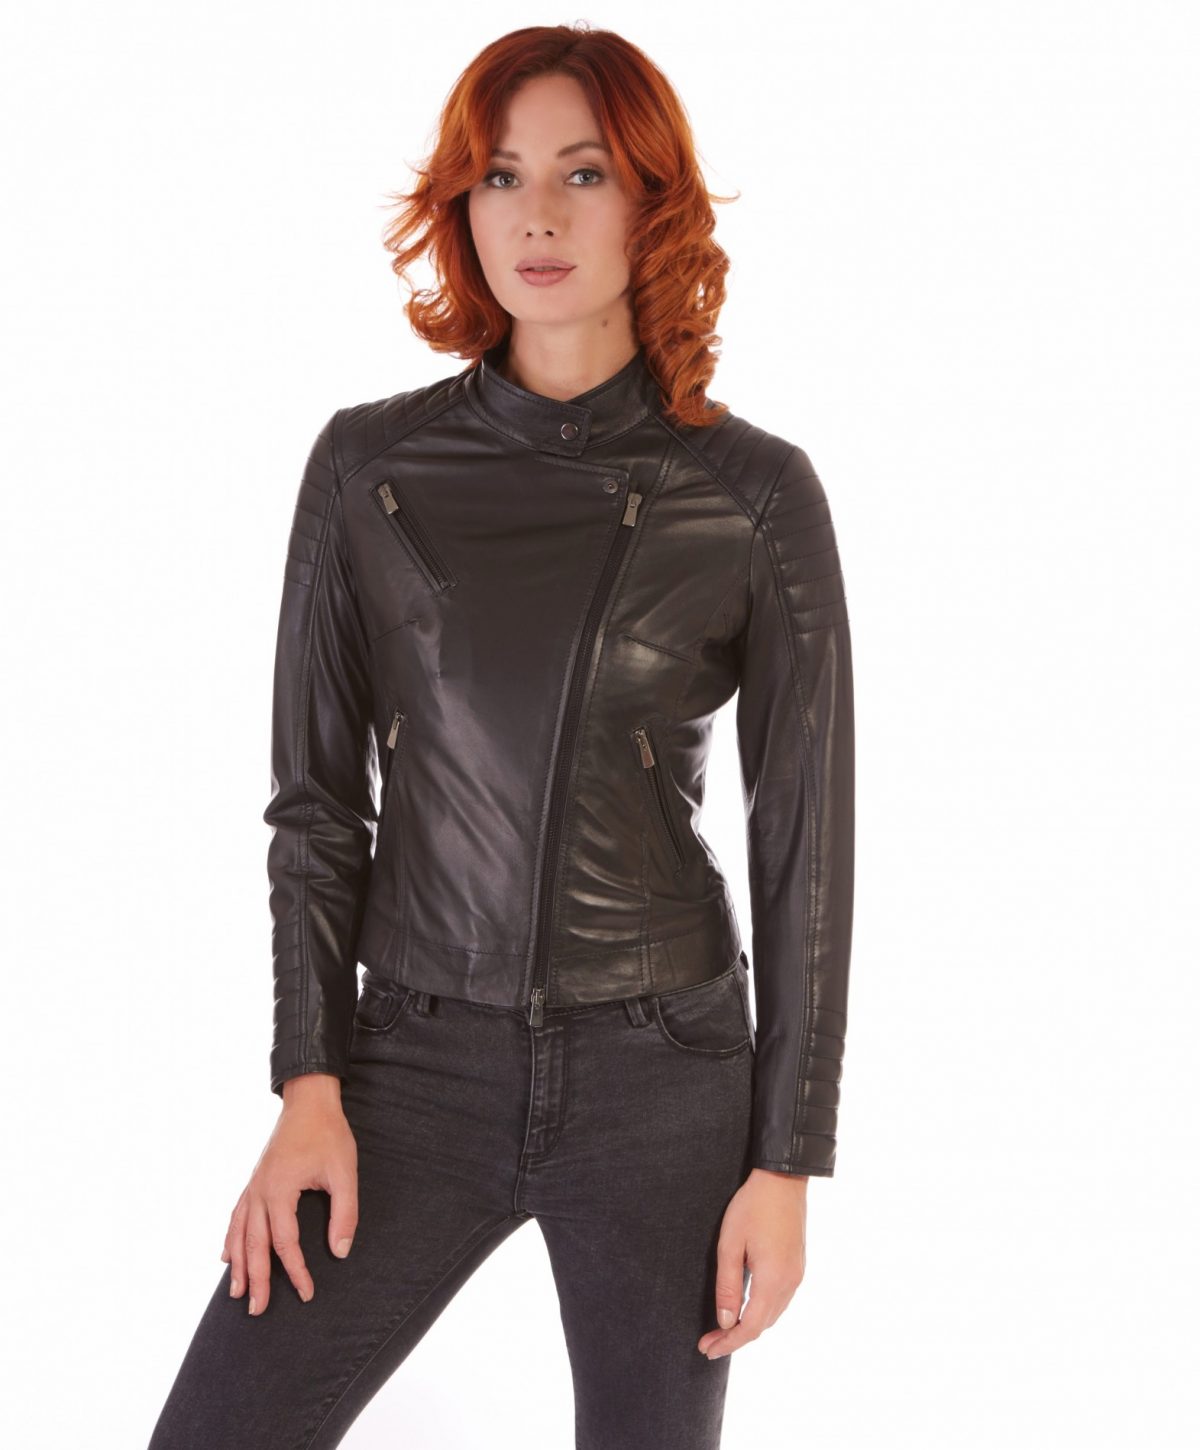 Nero Color Lamb Leather Biker Quilted Jacket Smooth Effect